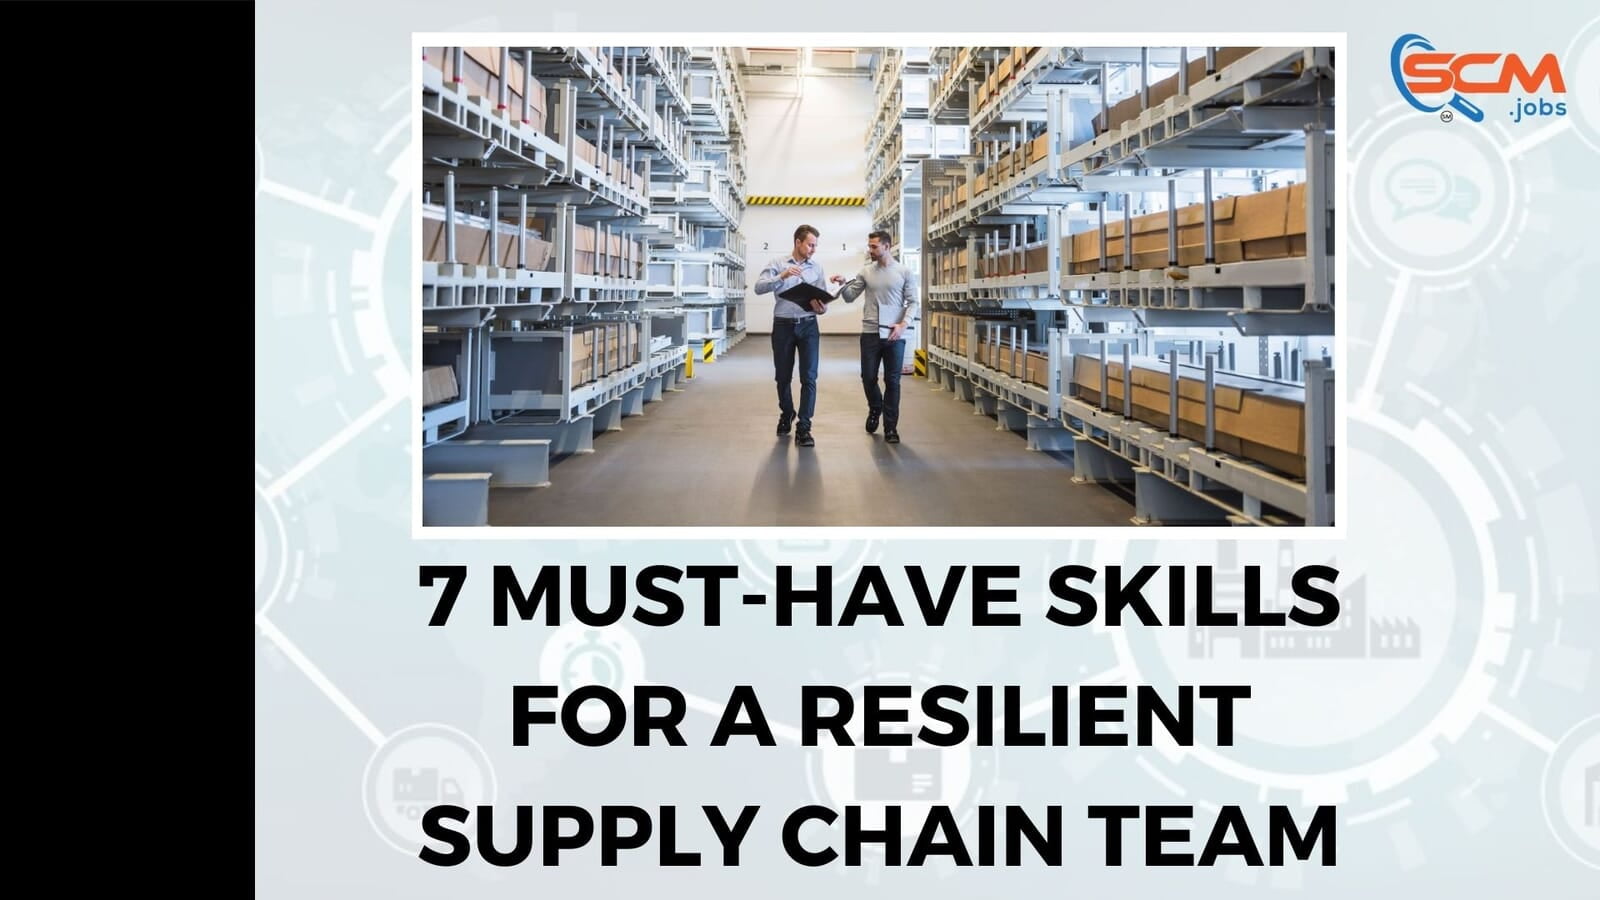 7 Must-Have Skills for a Resilient Supply Chain Team